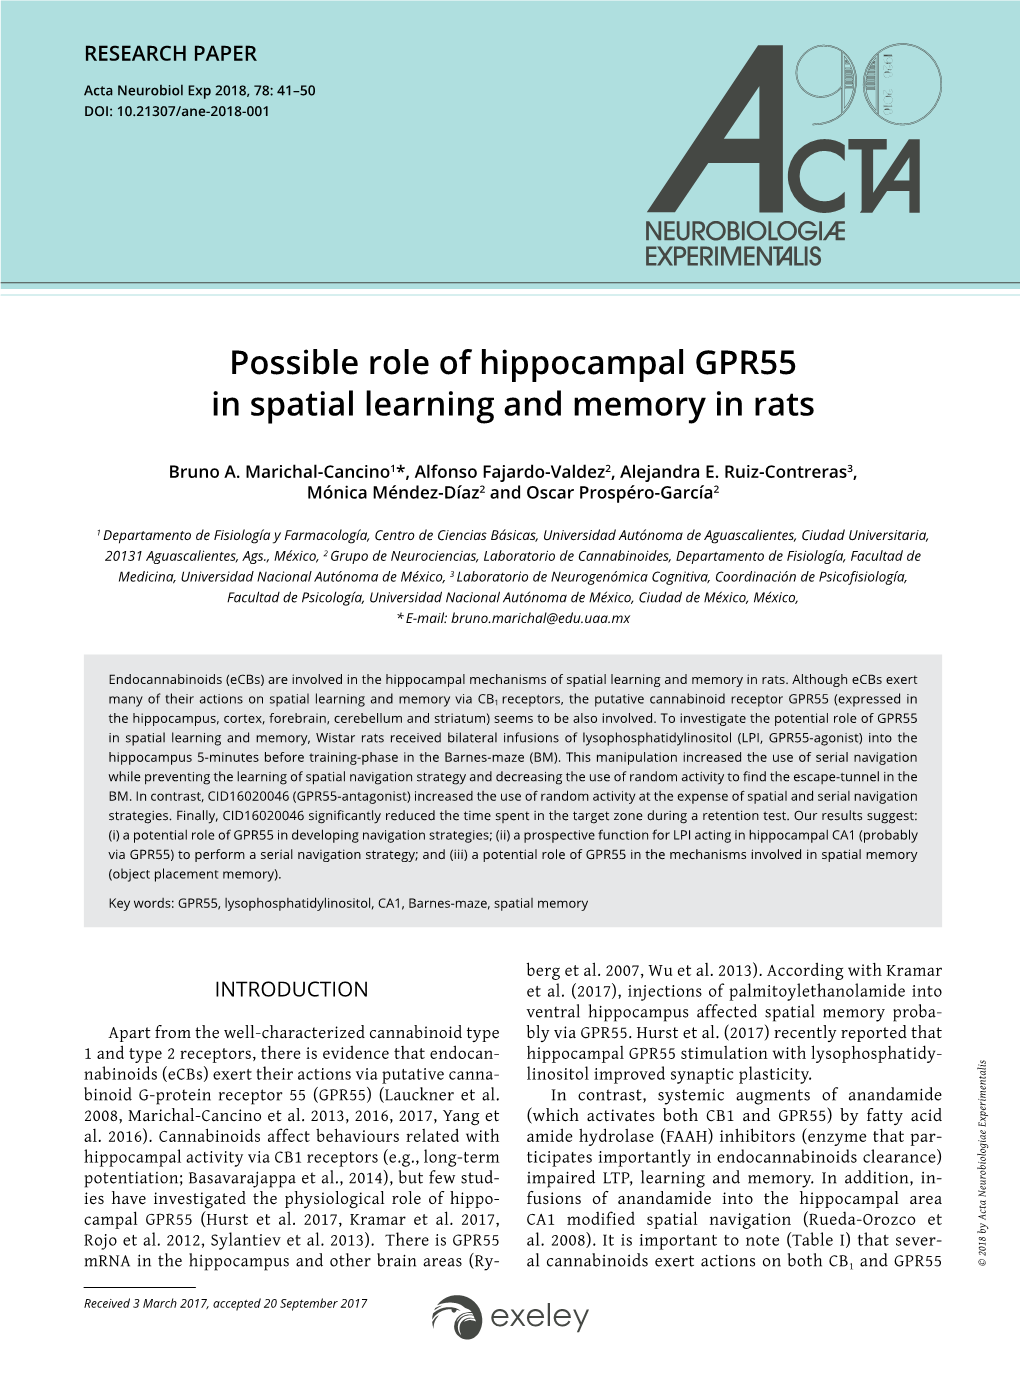 Possible Role of Hippocampal GPR55 in Spatial Learning and Memory in Rats